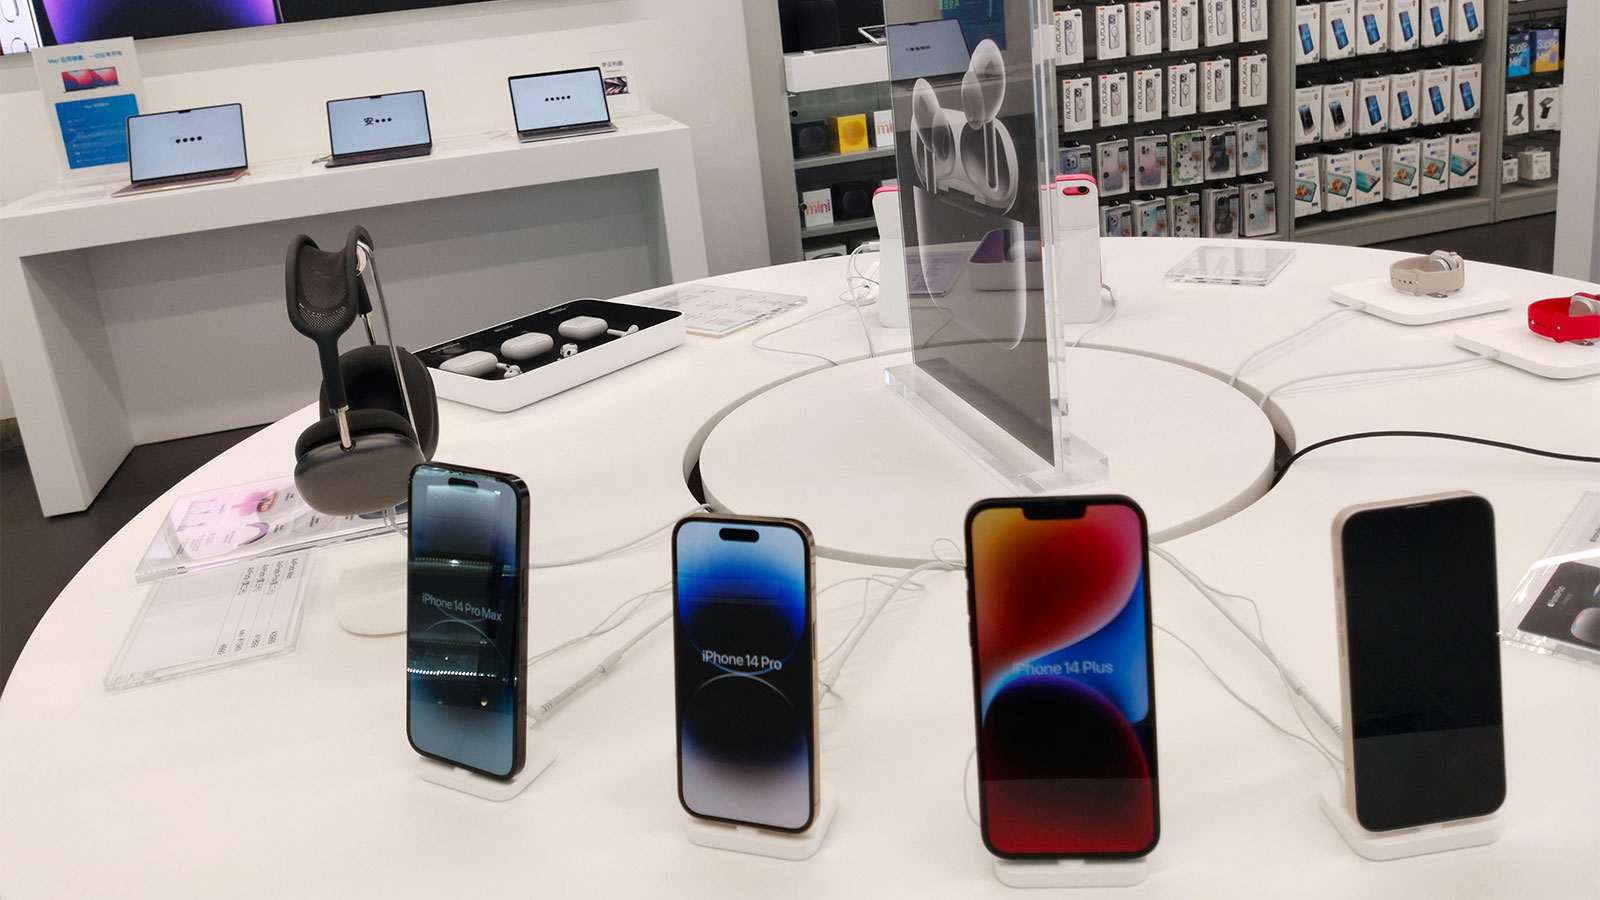 Iphones on display in an apple store